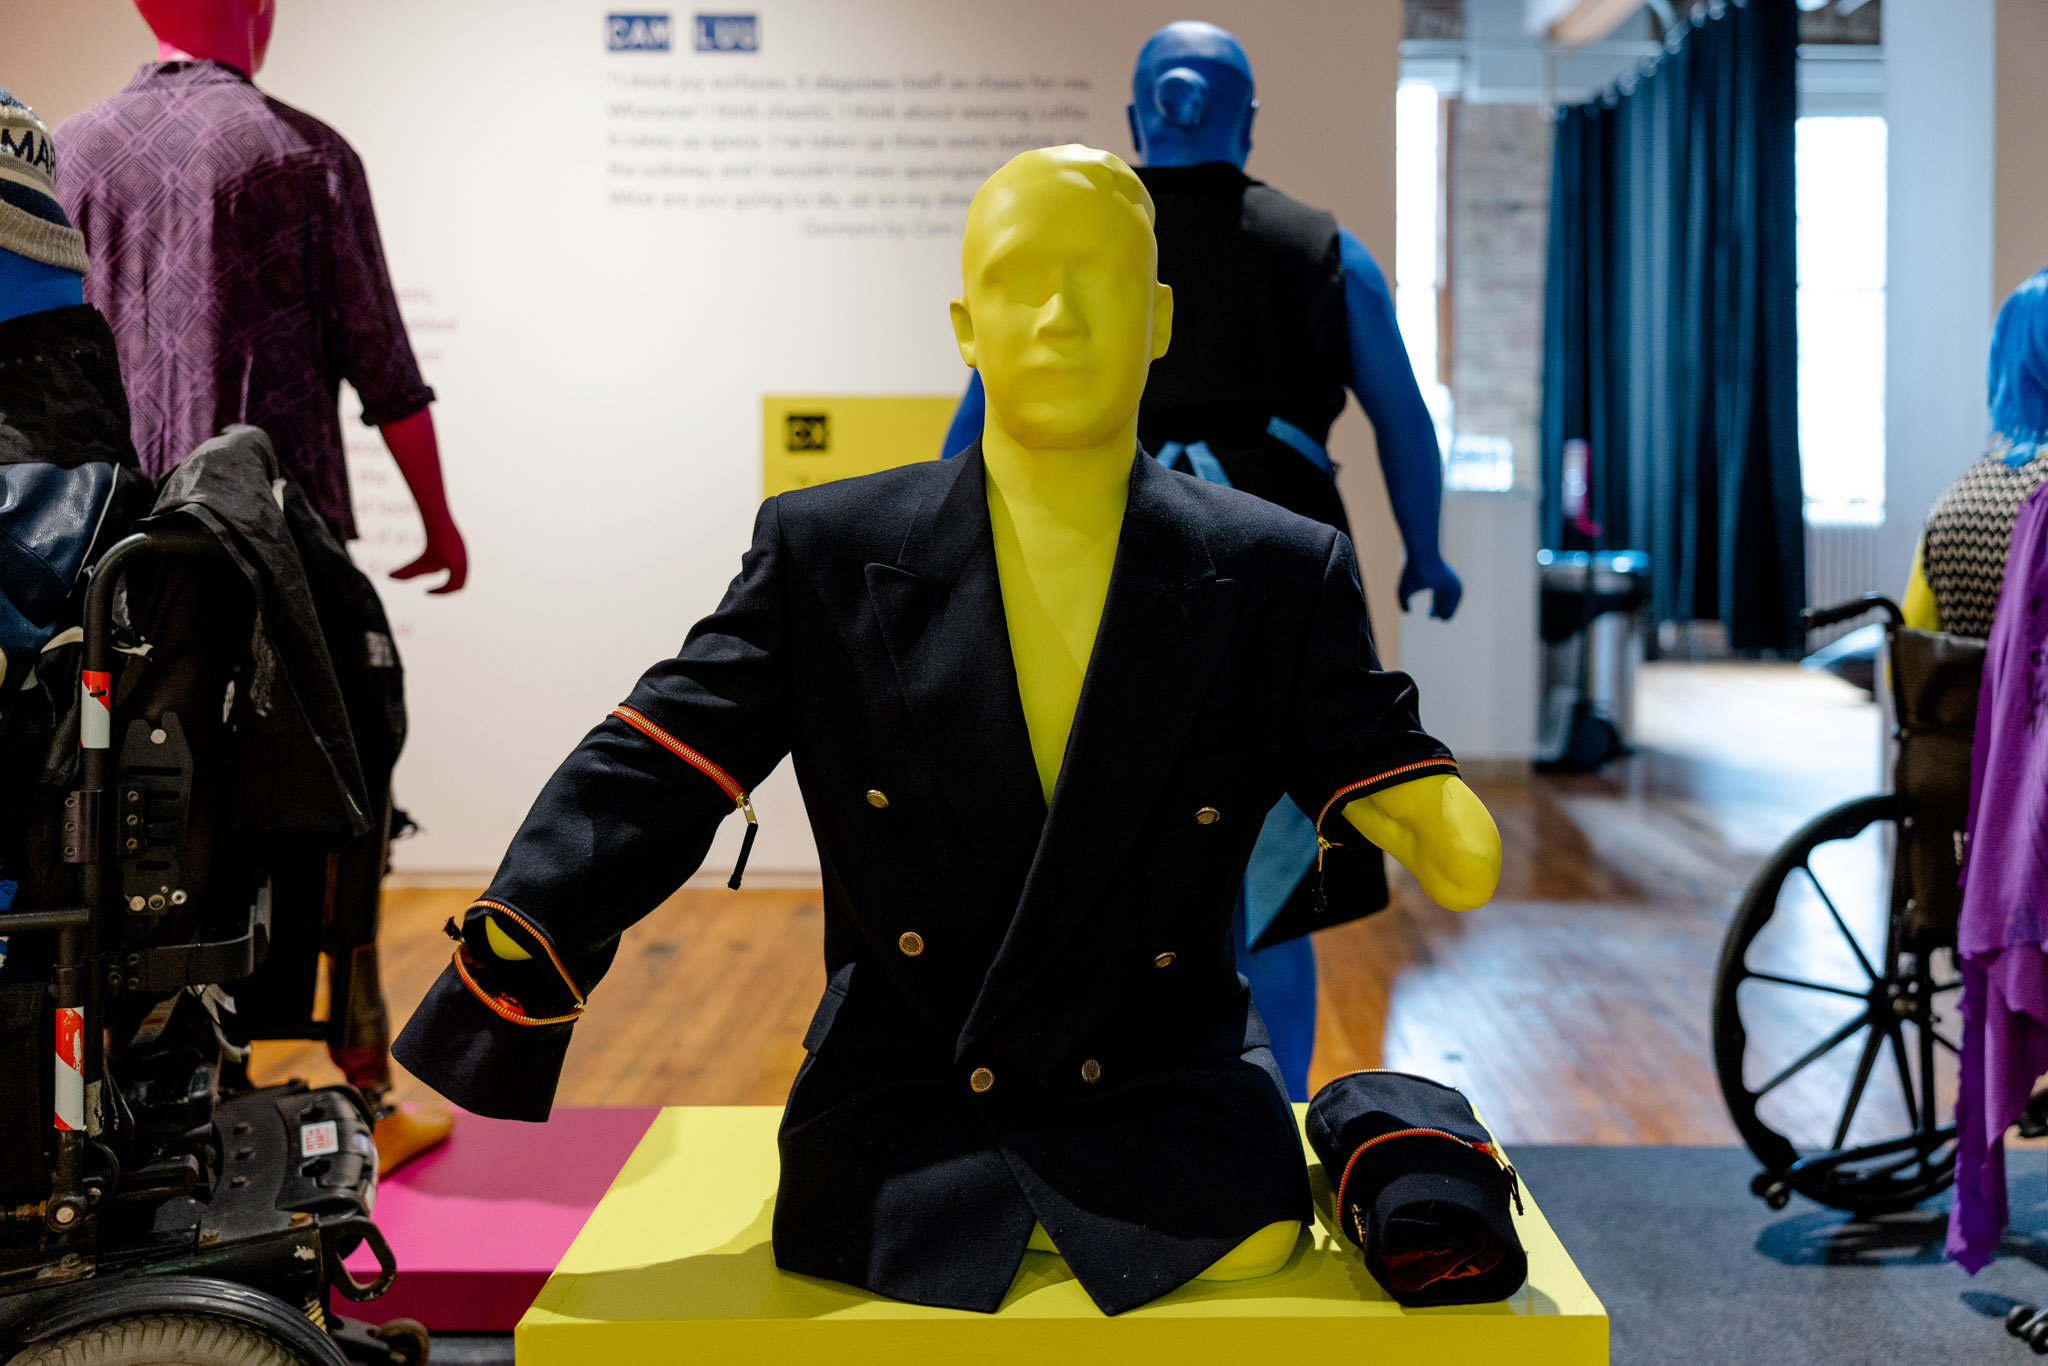 A 3D printed neon yellow mannequin wearing a navy blue suit jacket in a gallery setting. 